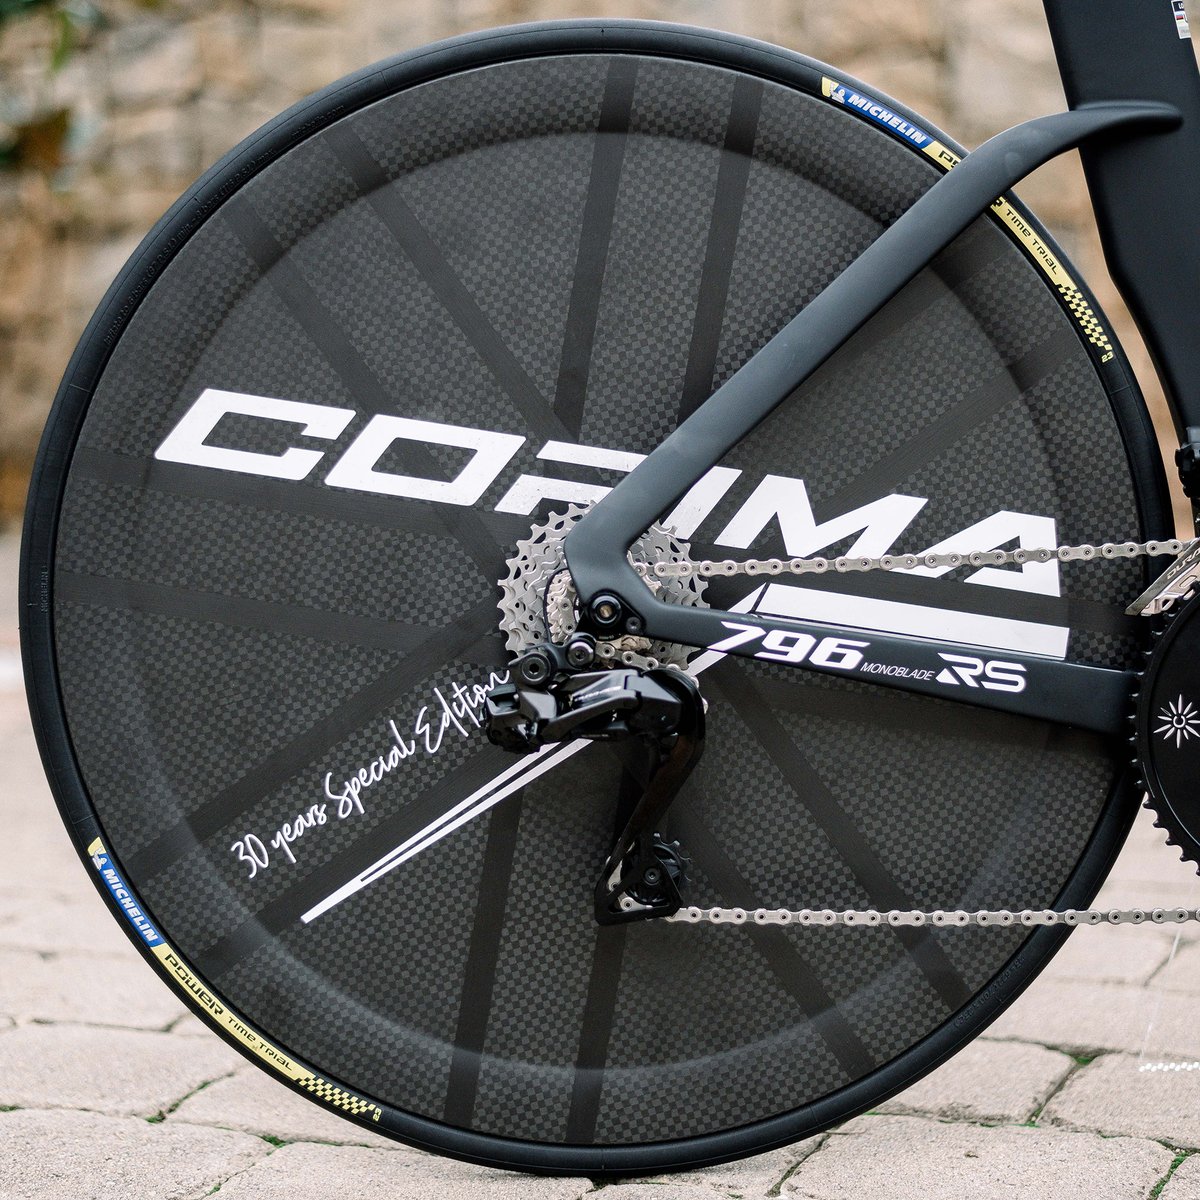 Our WS TT wheelset meets the needs of demanding TT and Triathlon riders and our collaboration with @TeamCOFIDIS allows us to develop exceptional products for competing at the highest level of the sport 🇫🇷 bit.ly/WS_TT #corima #wheels #performancewheels #carbon